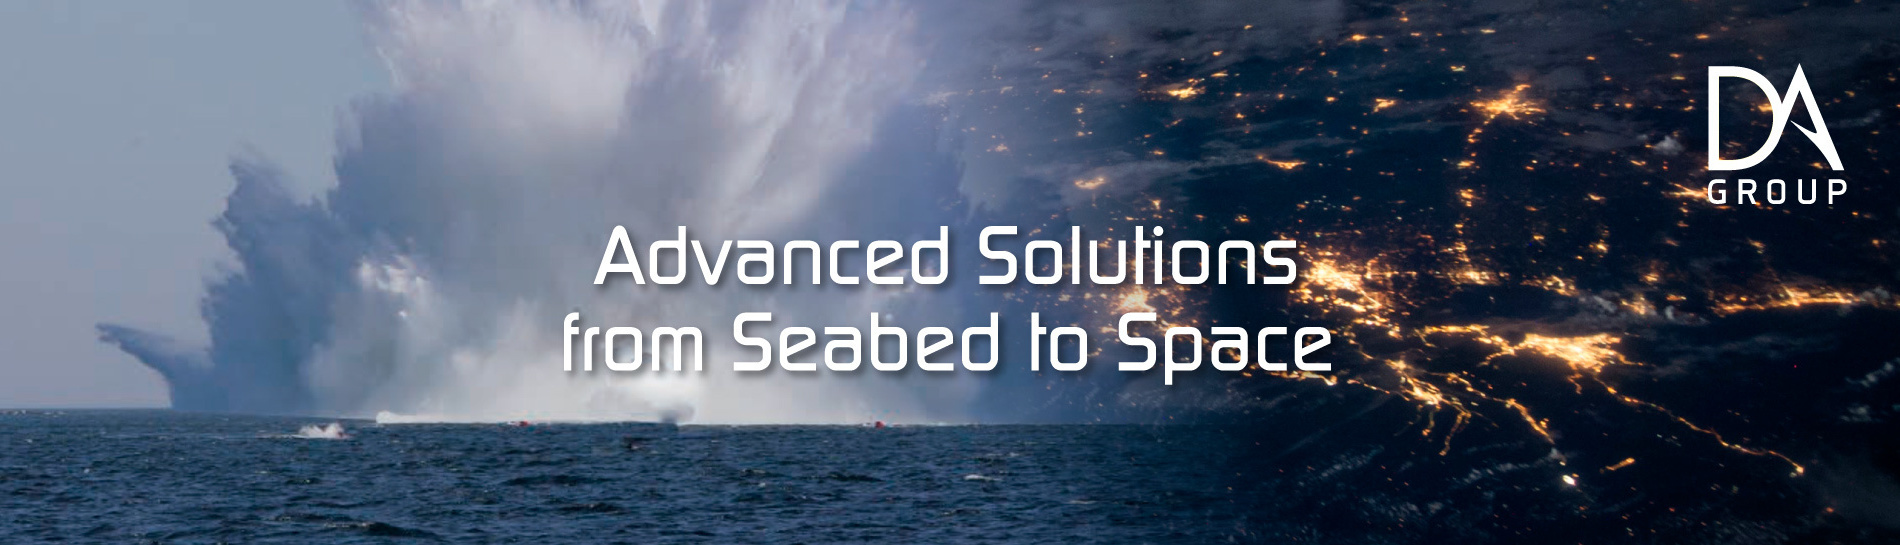 Advanced Solutions from Seabed to Space